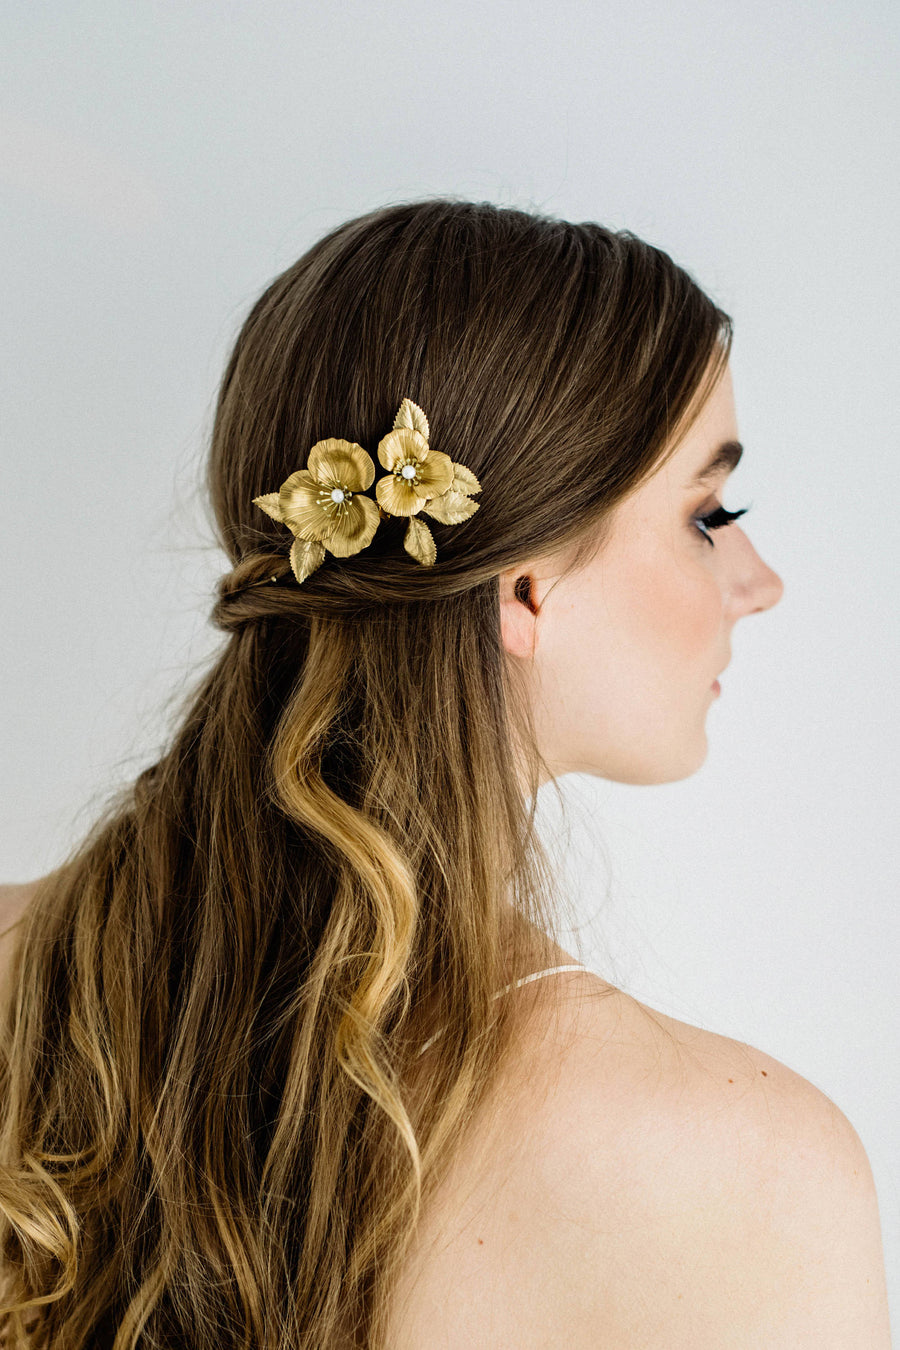 Bride holding a gold flower hair comb